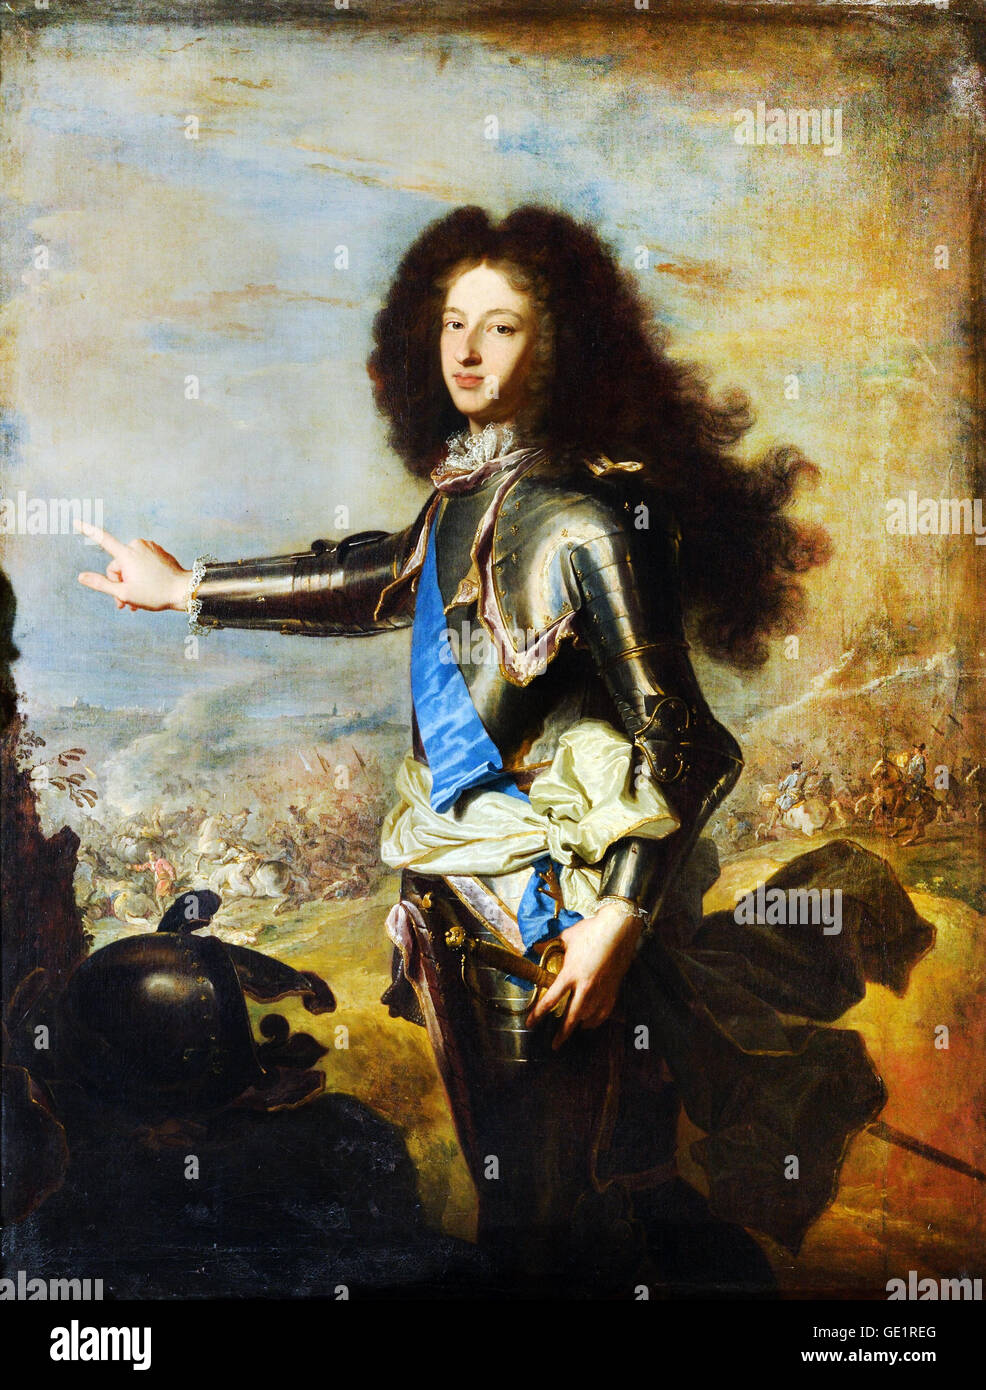 Hyacinthe Rigaud, Louis de France, Duke of Burgundy (1682-1712). Circa 1704. Oil on canvas. Palace of Versailles, France. Stock Photo